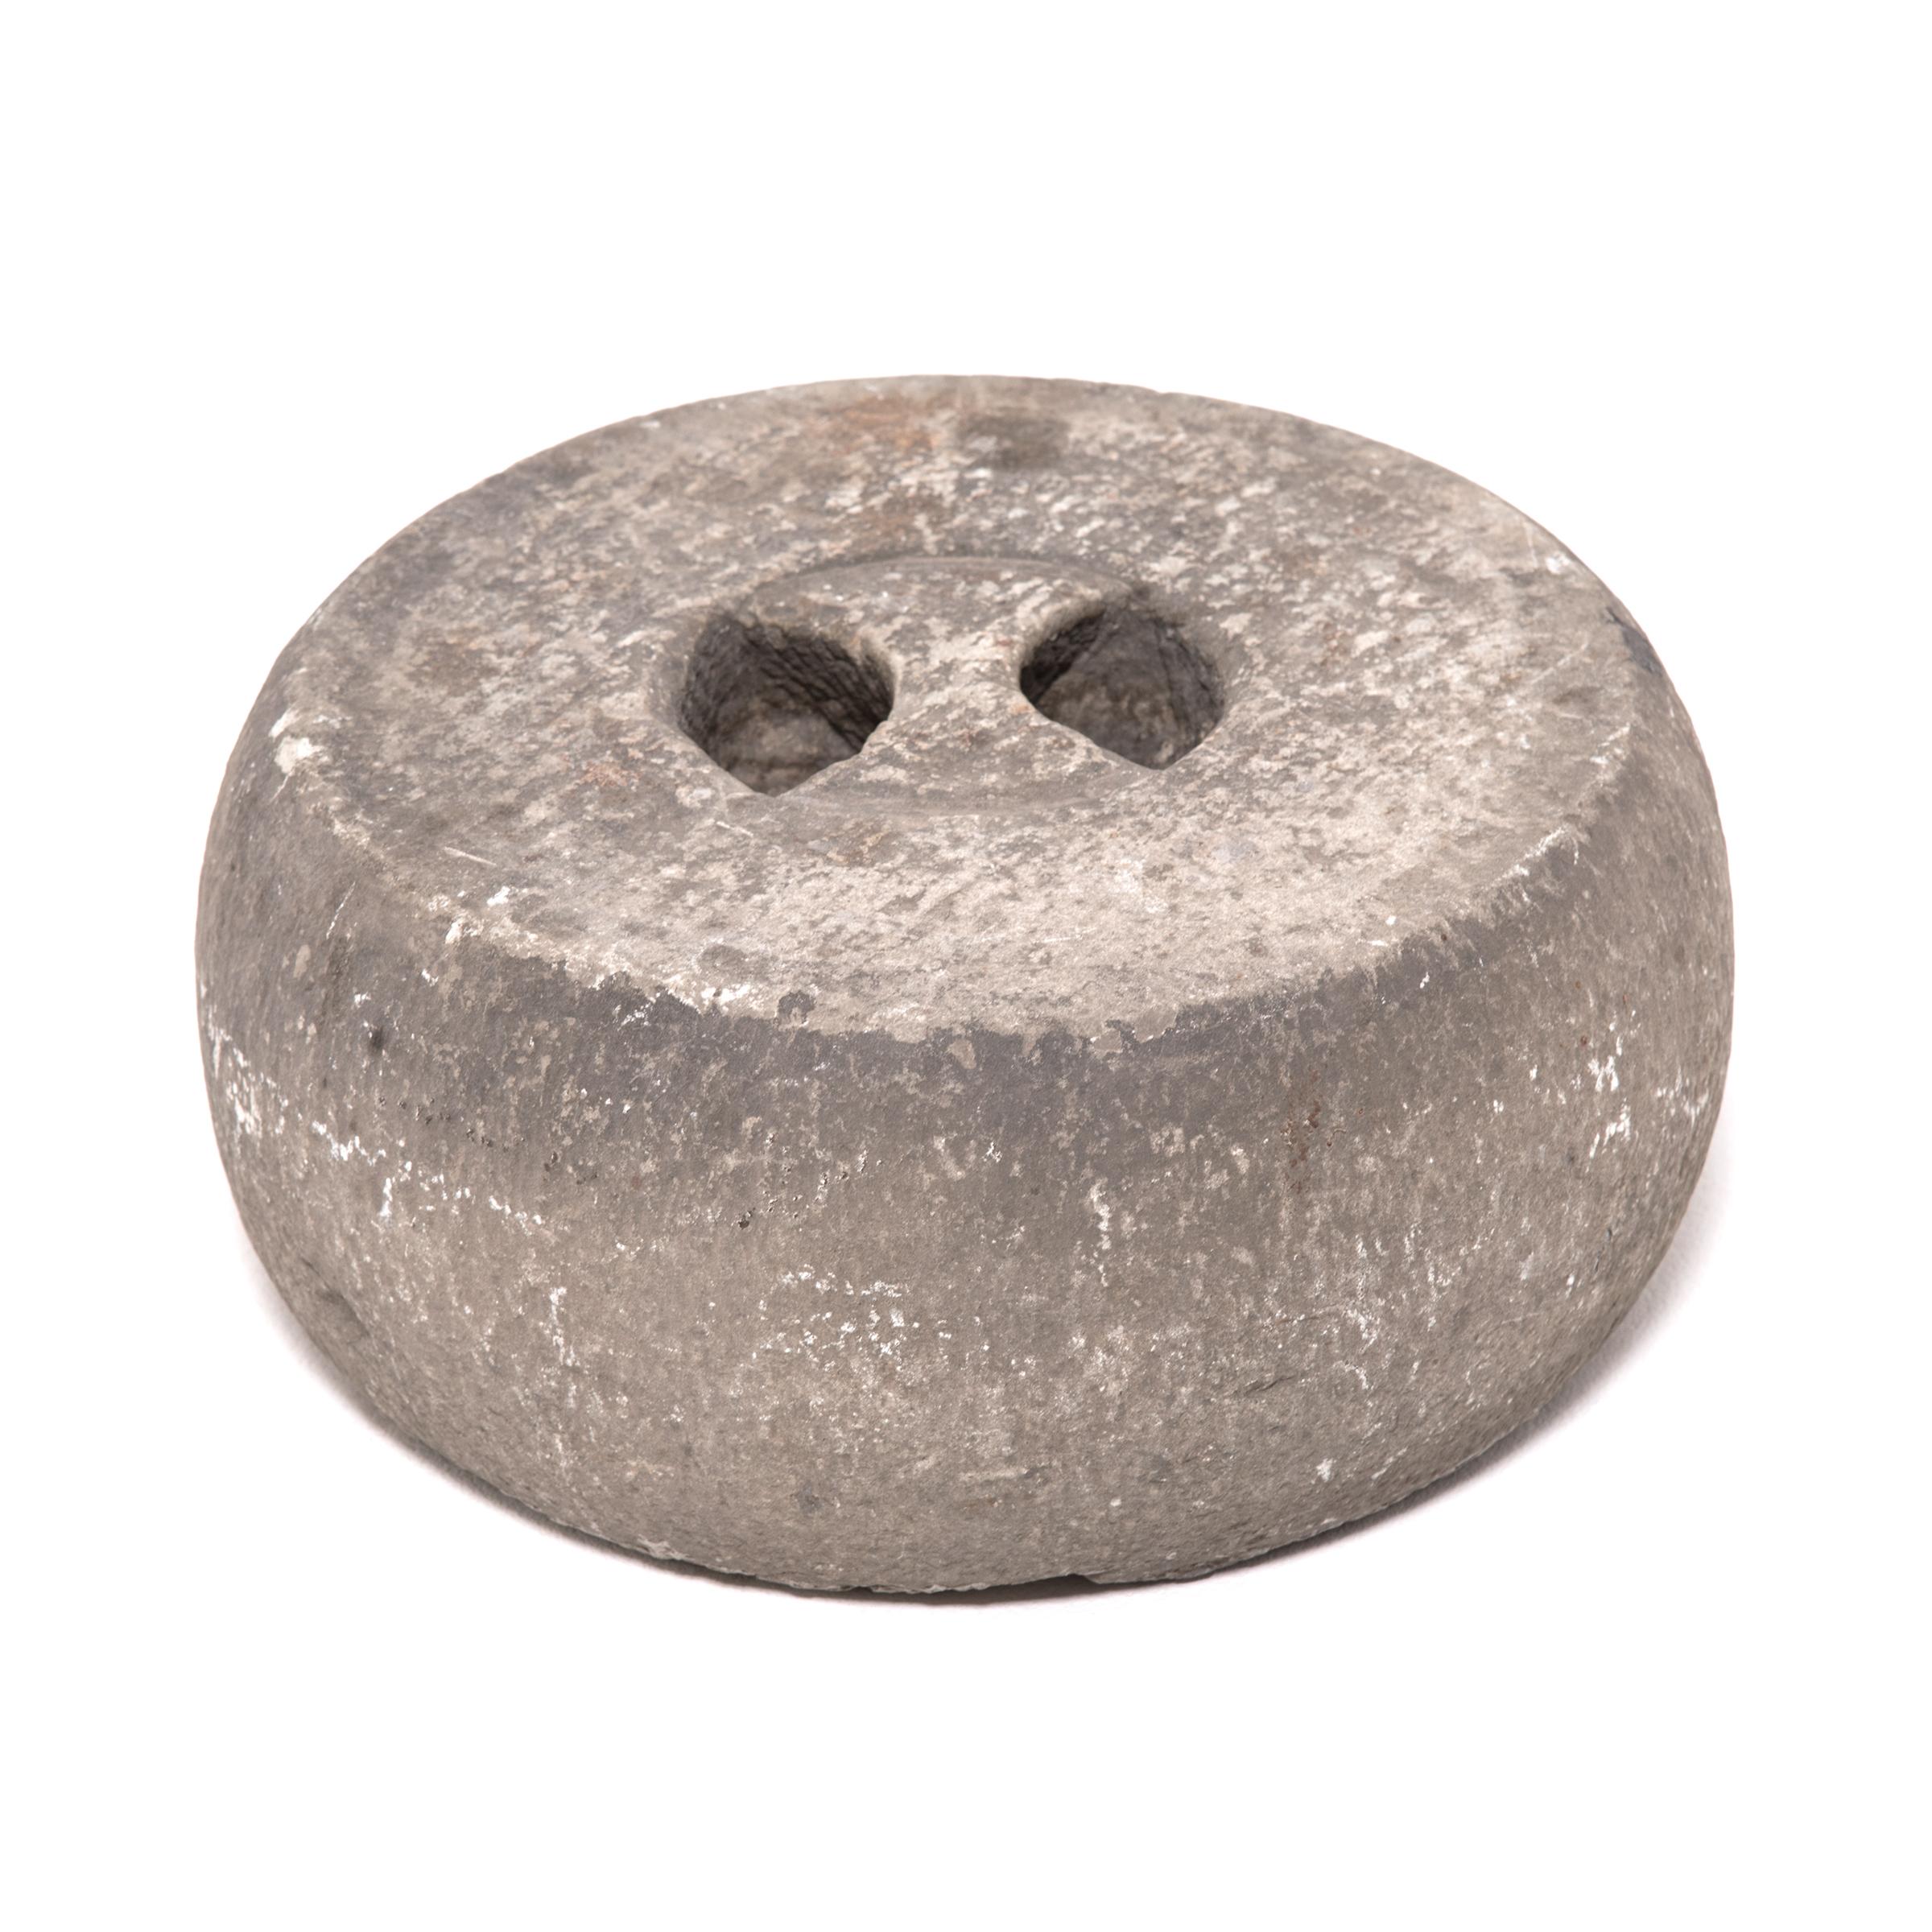 Once used as part of intensive martial arts training, this 19th-century Chinese round weight was carved from limestone and used much like a modern kettle bell. Likely threaded with a strong rope, the weight was either swung around or lifted to aid